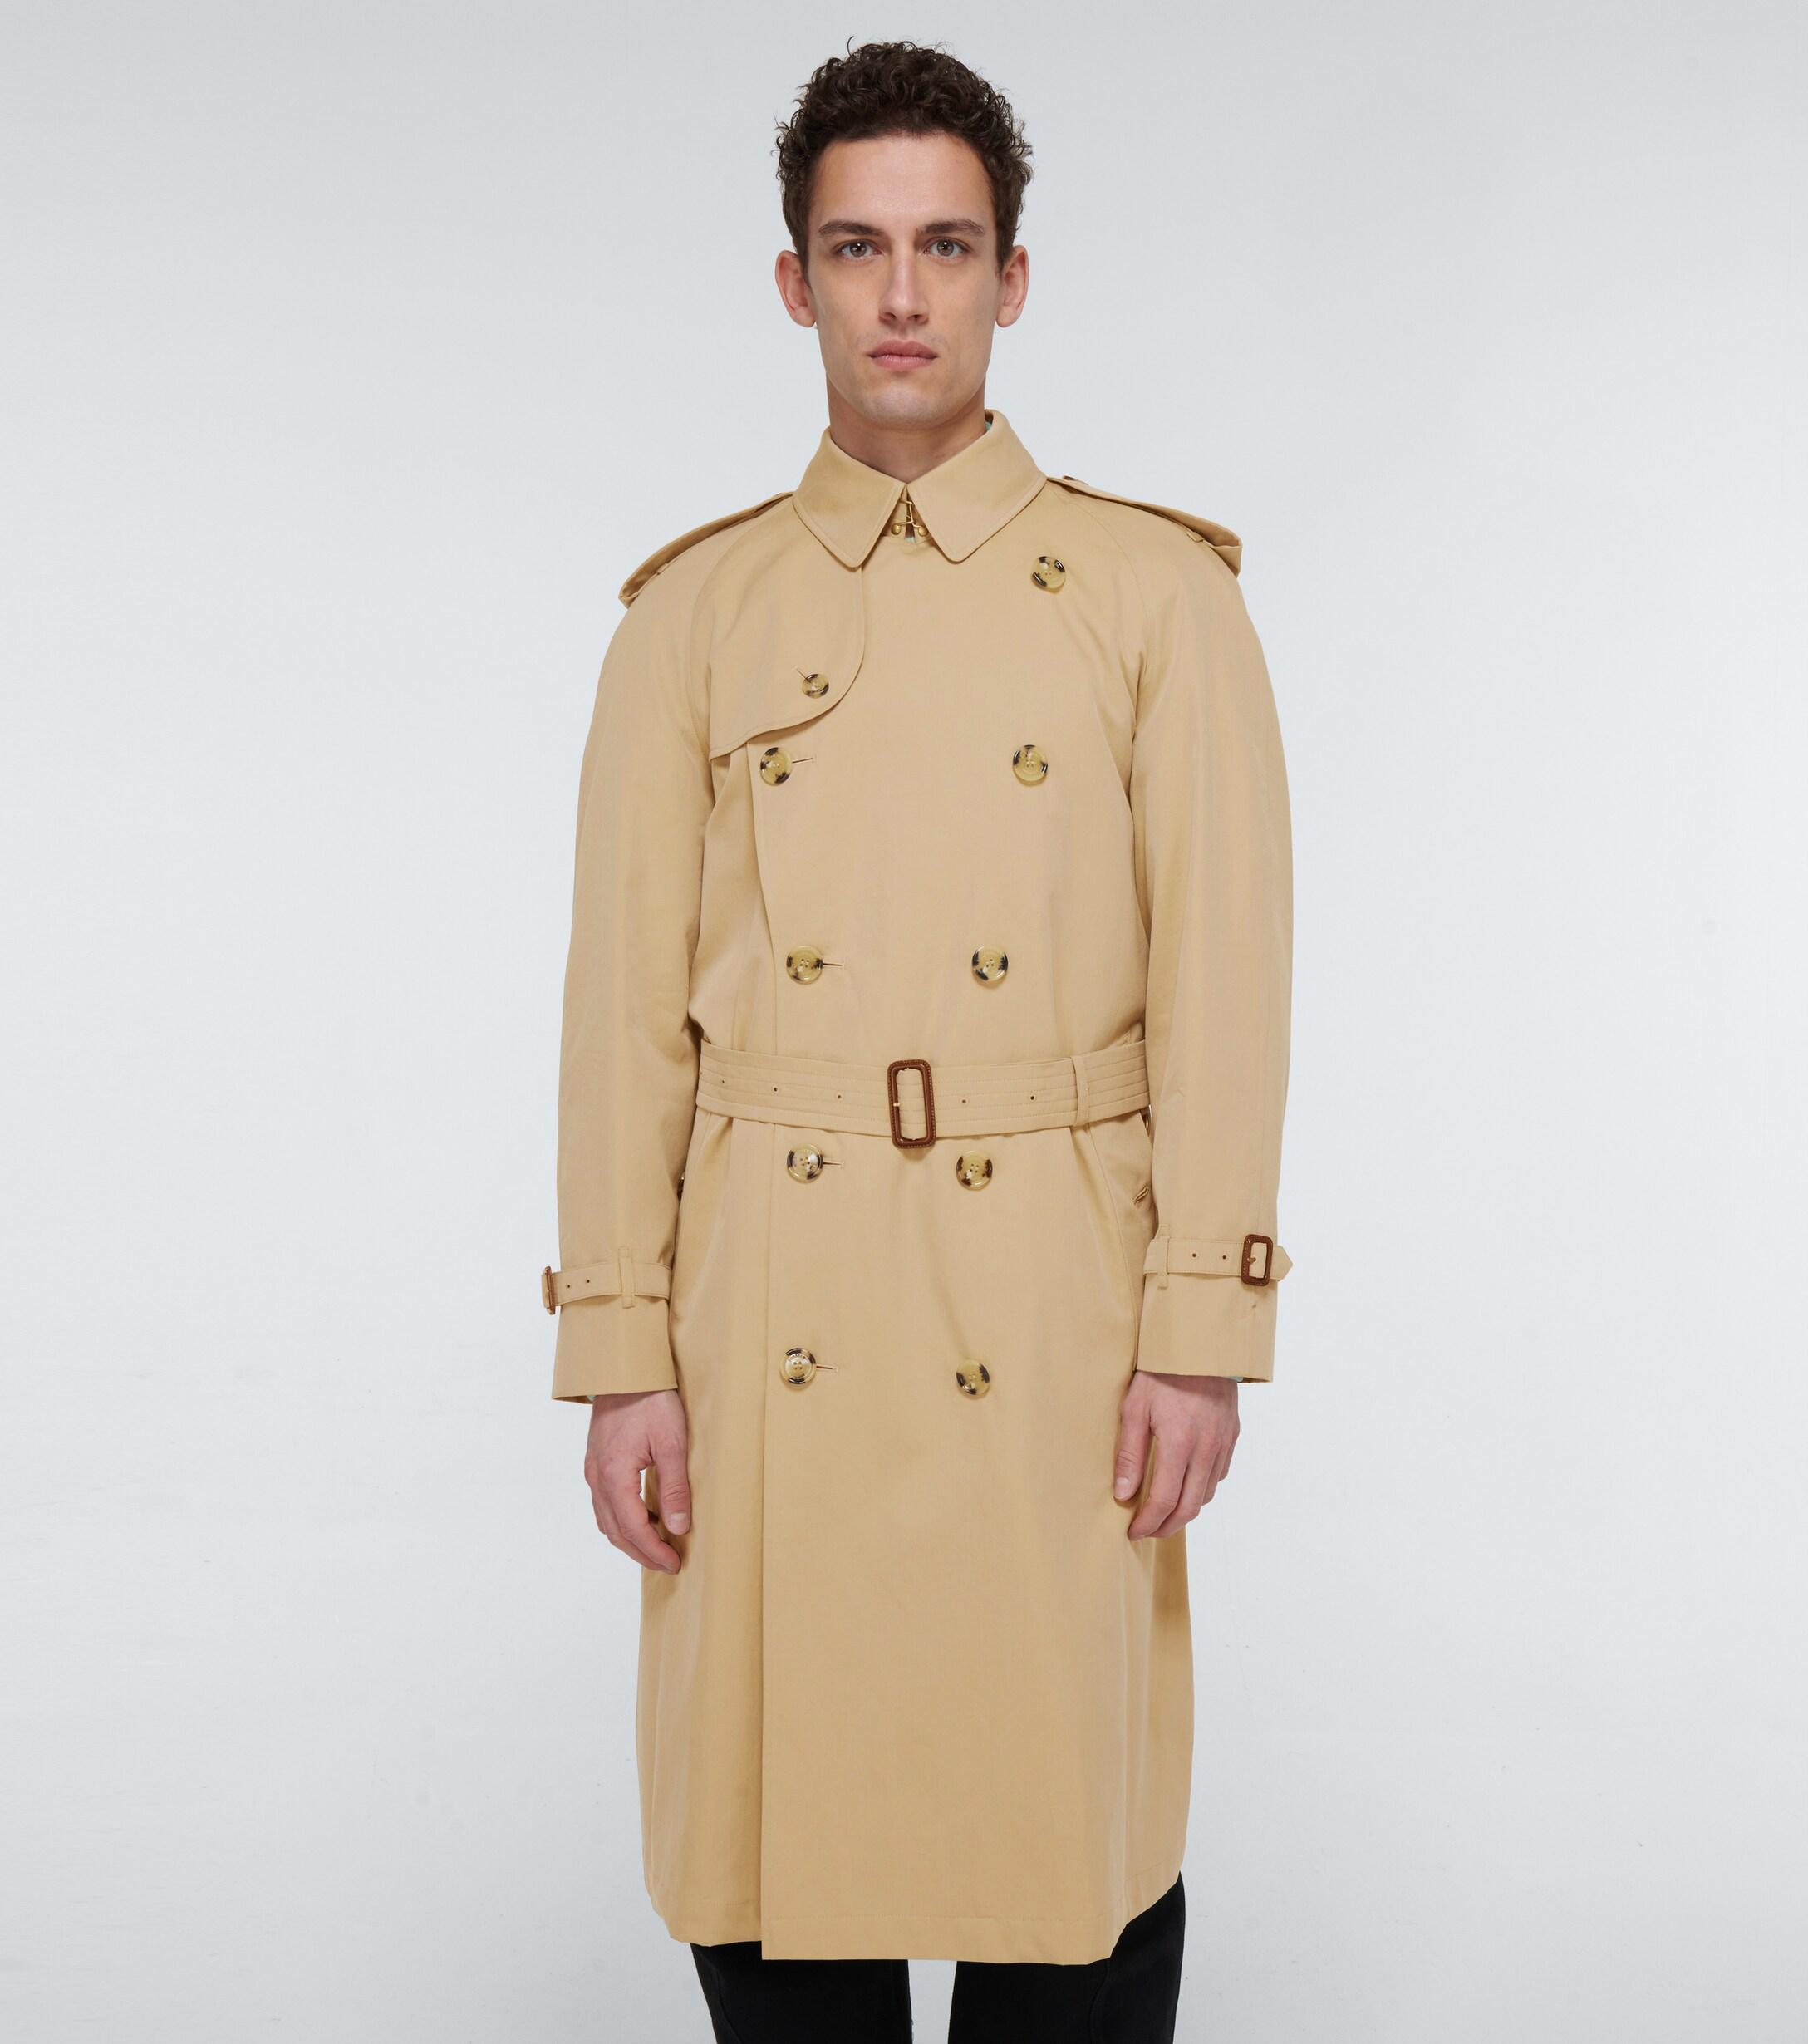 Burberry Cotton Westminster Classic Trench Coat in Beige (Natural) - Lyst